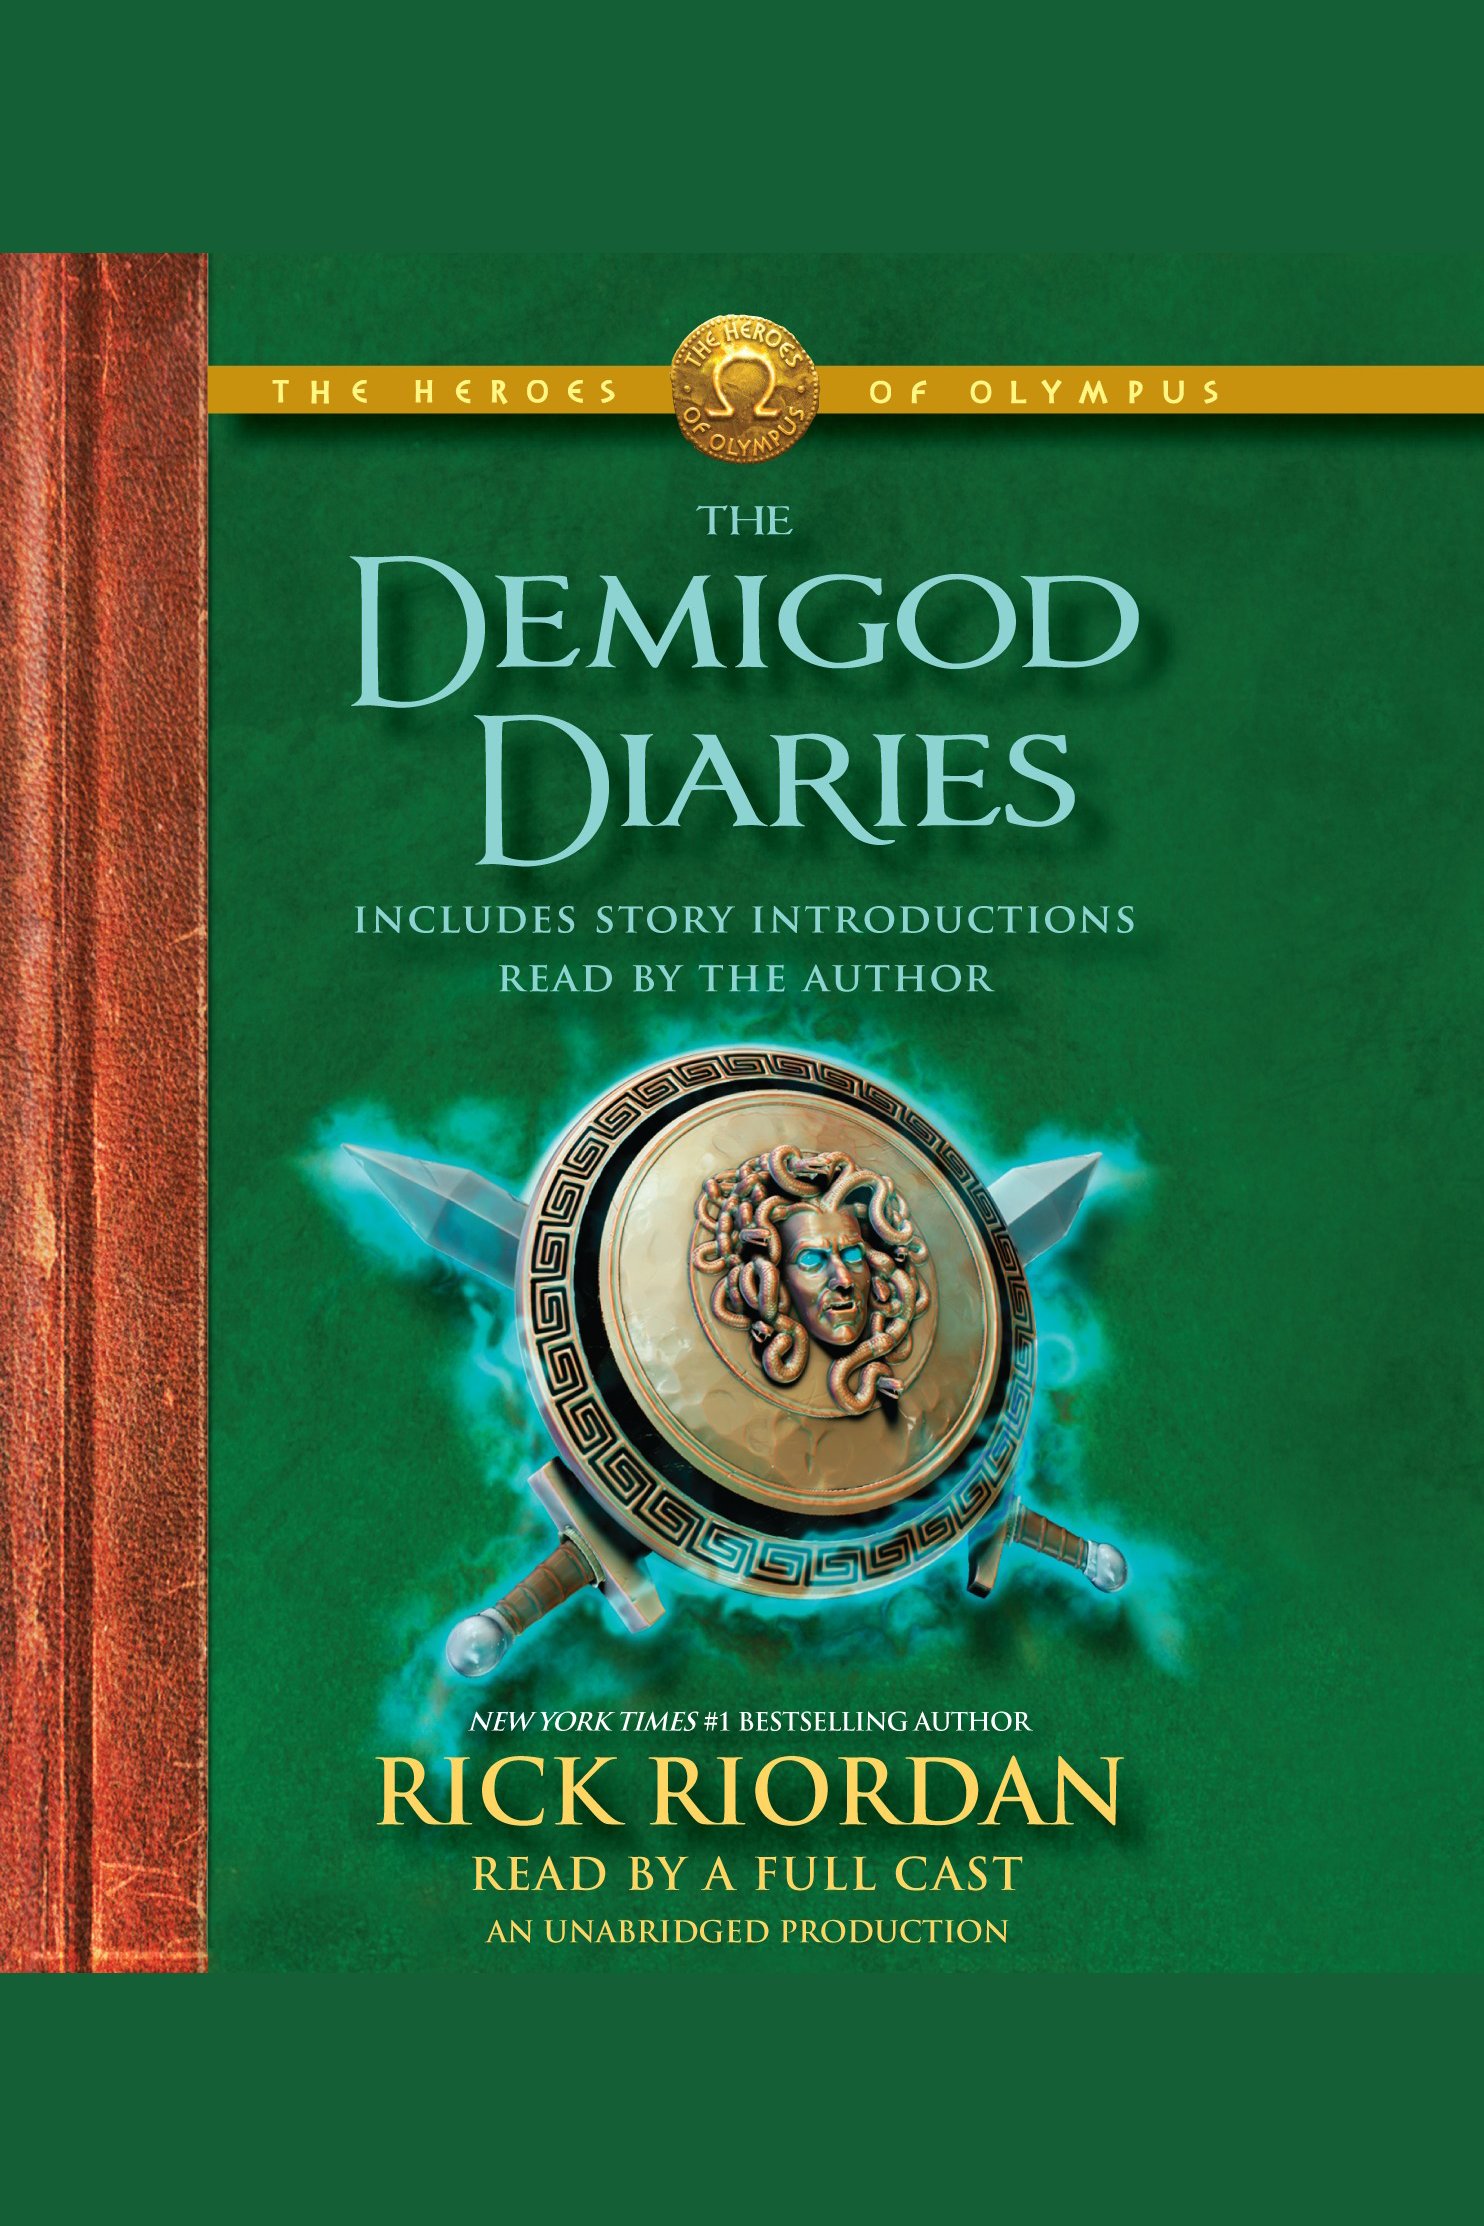 The demigod diaries cover image